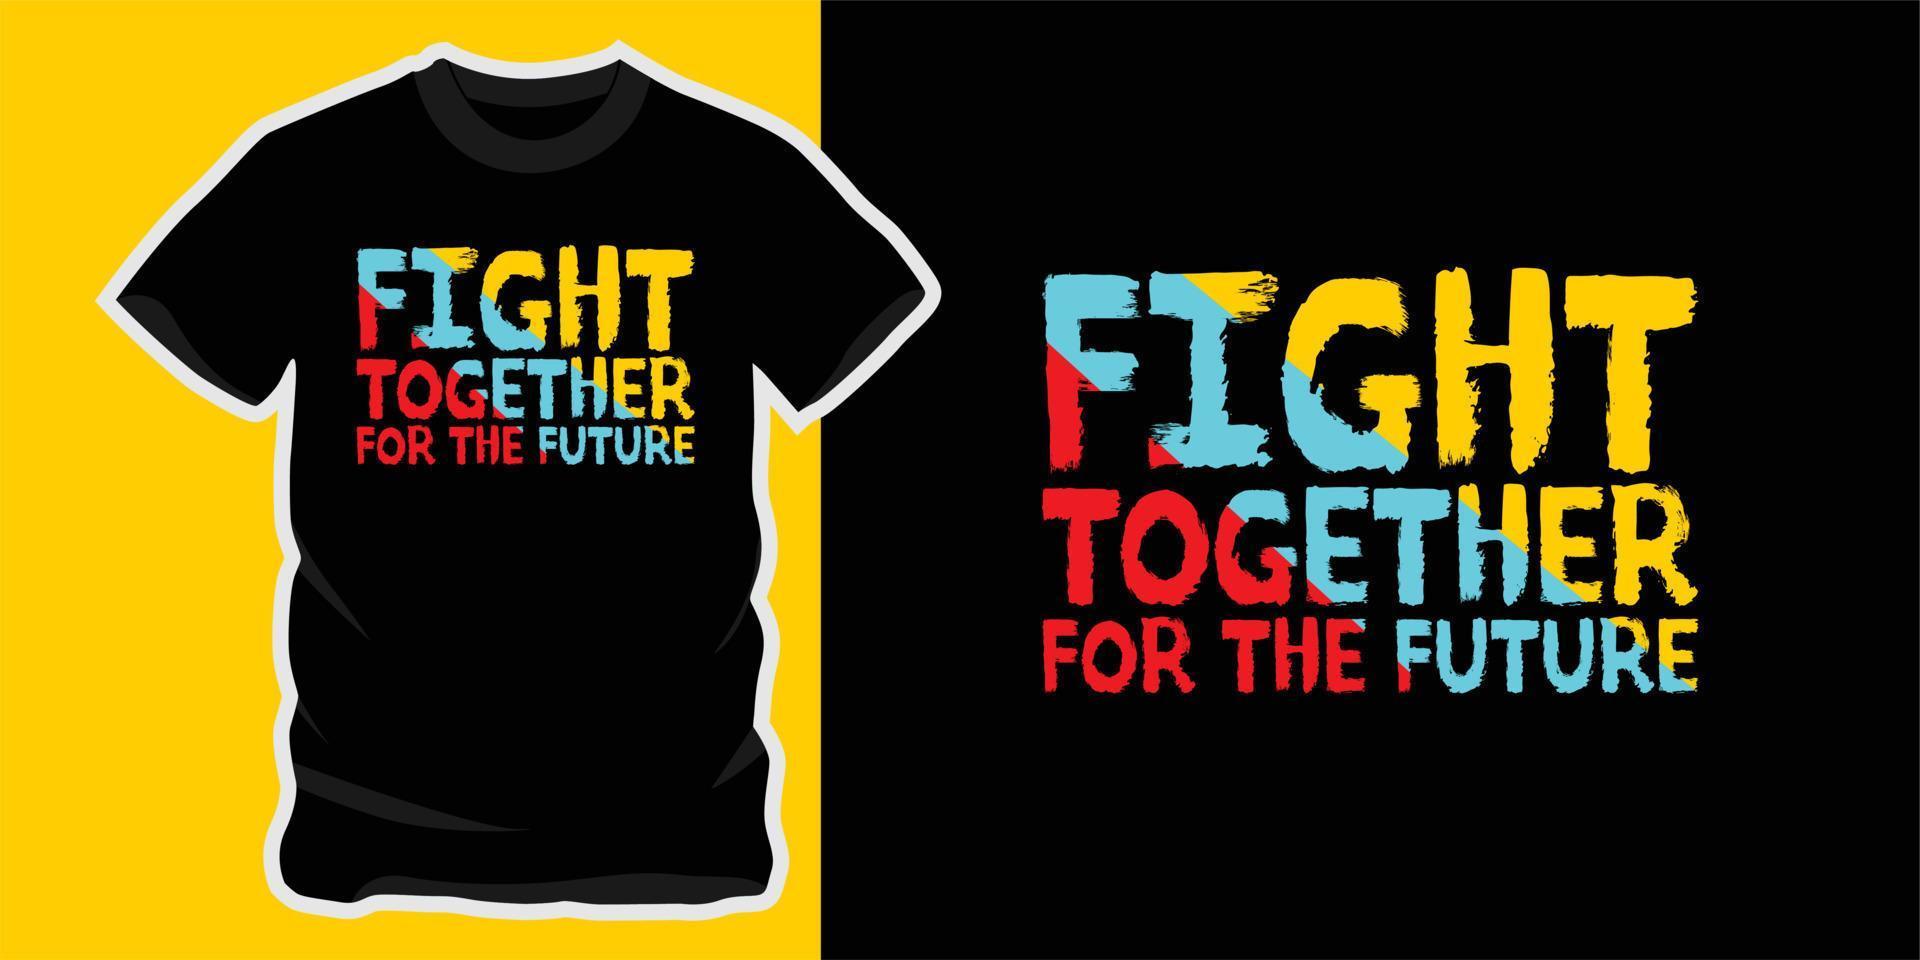 fight together for the future motivational quote t-shirt vector design